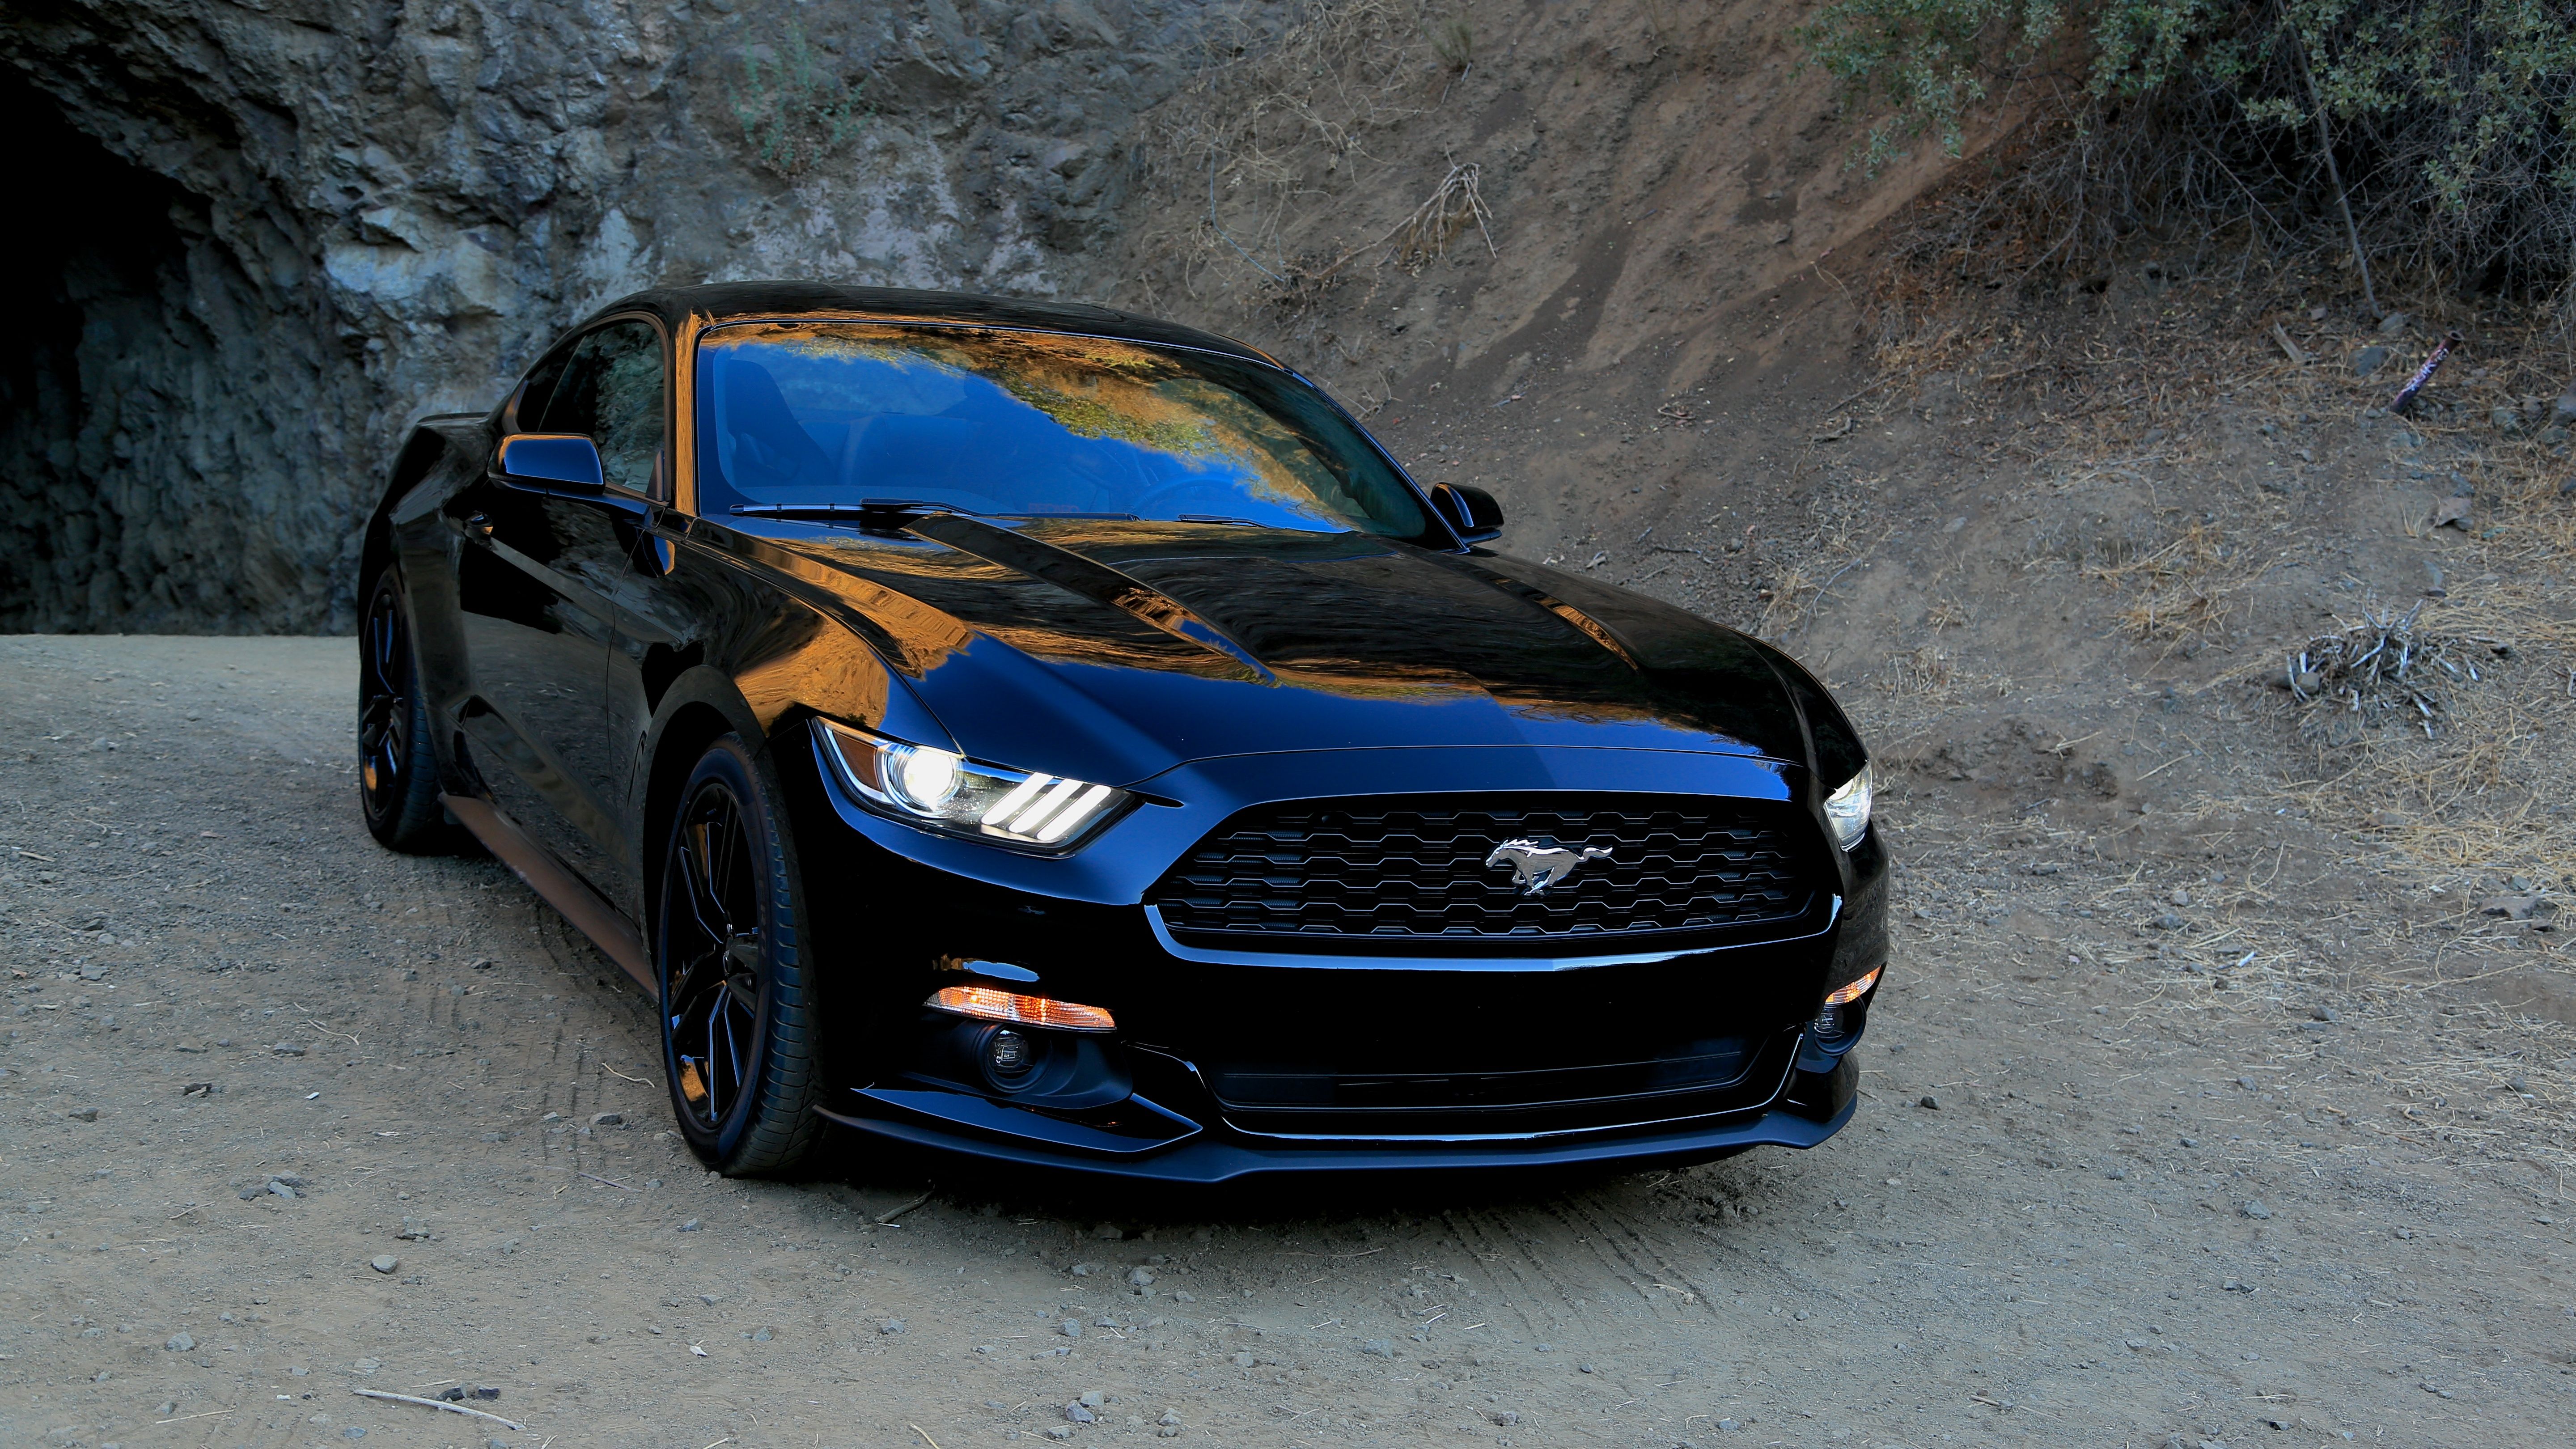 Comparing the price of the 2015 Ford Mustang and the 1965 edition